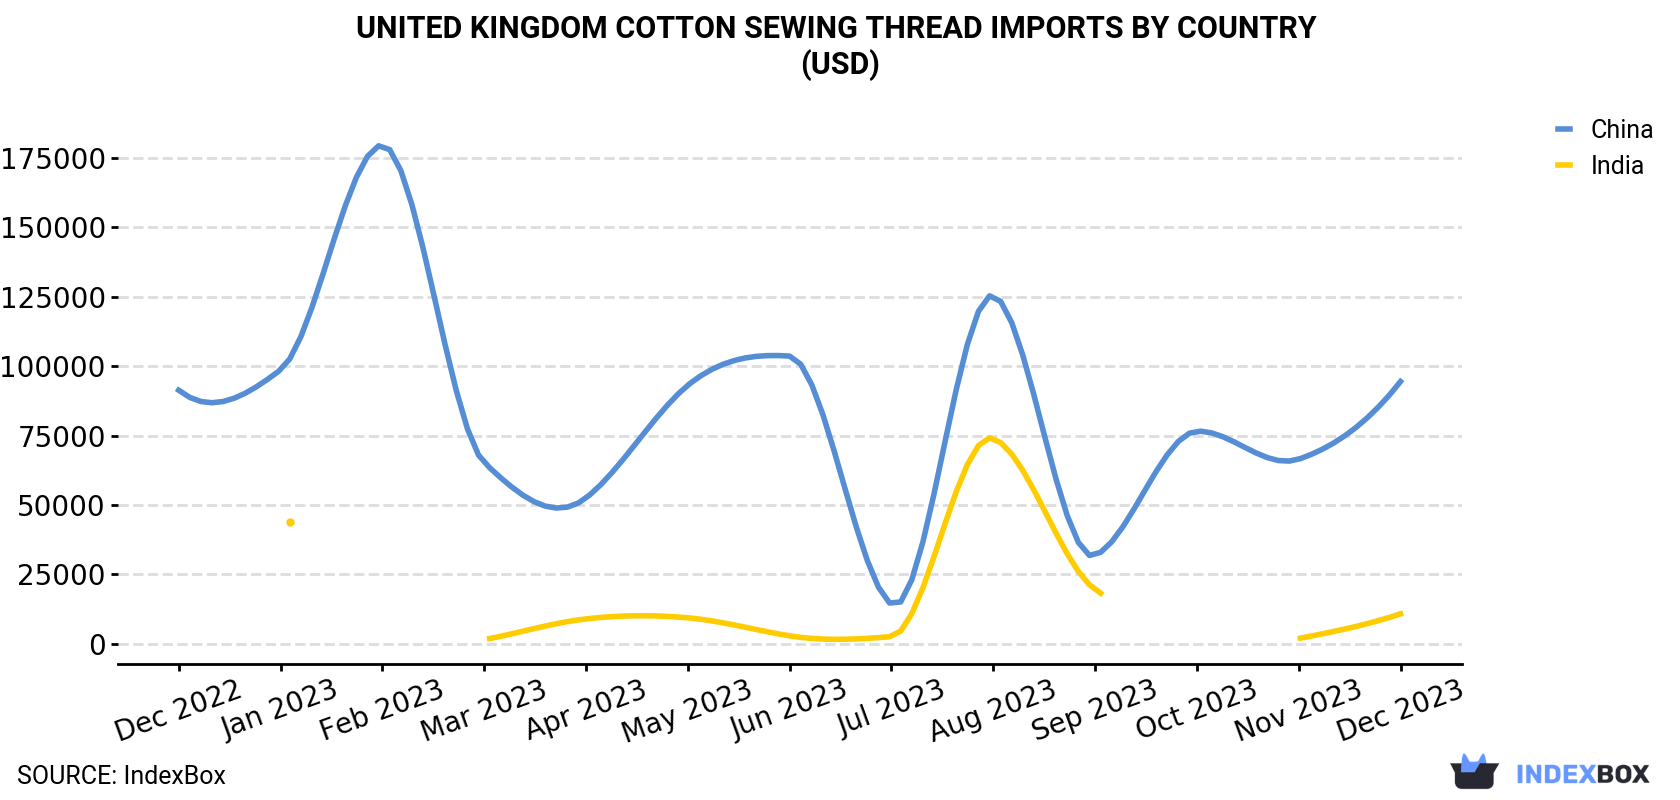 United Kingdom Cotton Sewing Thread Imports By Country (USD)